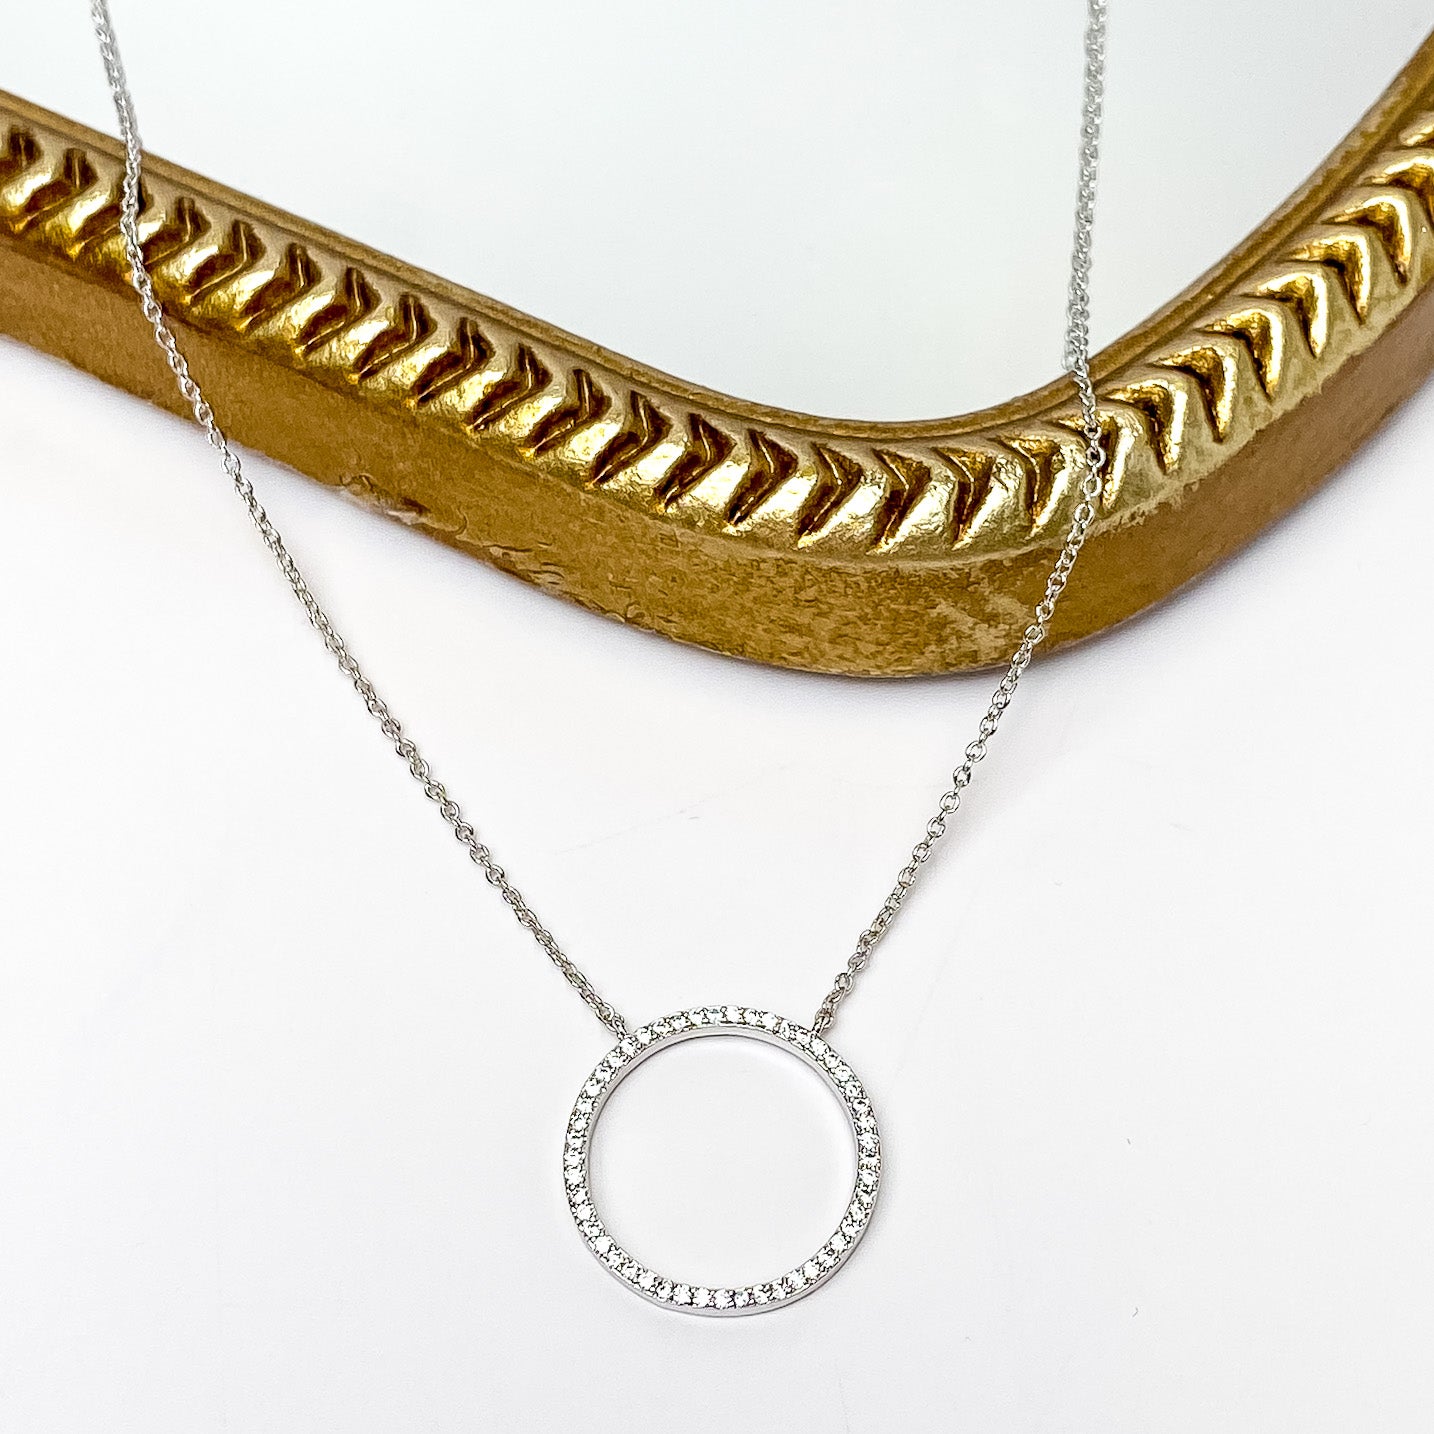 Silver chain necklace with an open circle pendant that has a cz crystal inlay. This necklace is pictured partially laying on a gold mirror on a white background. 